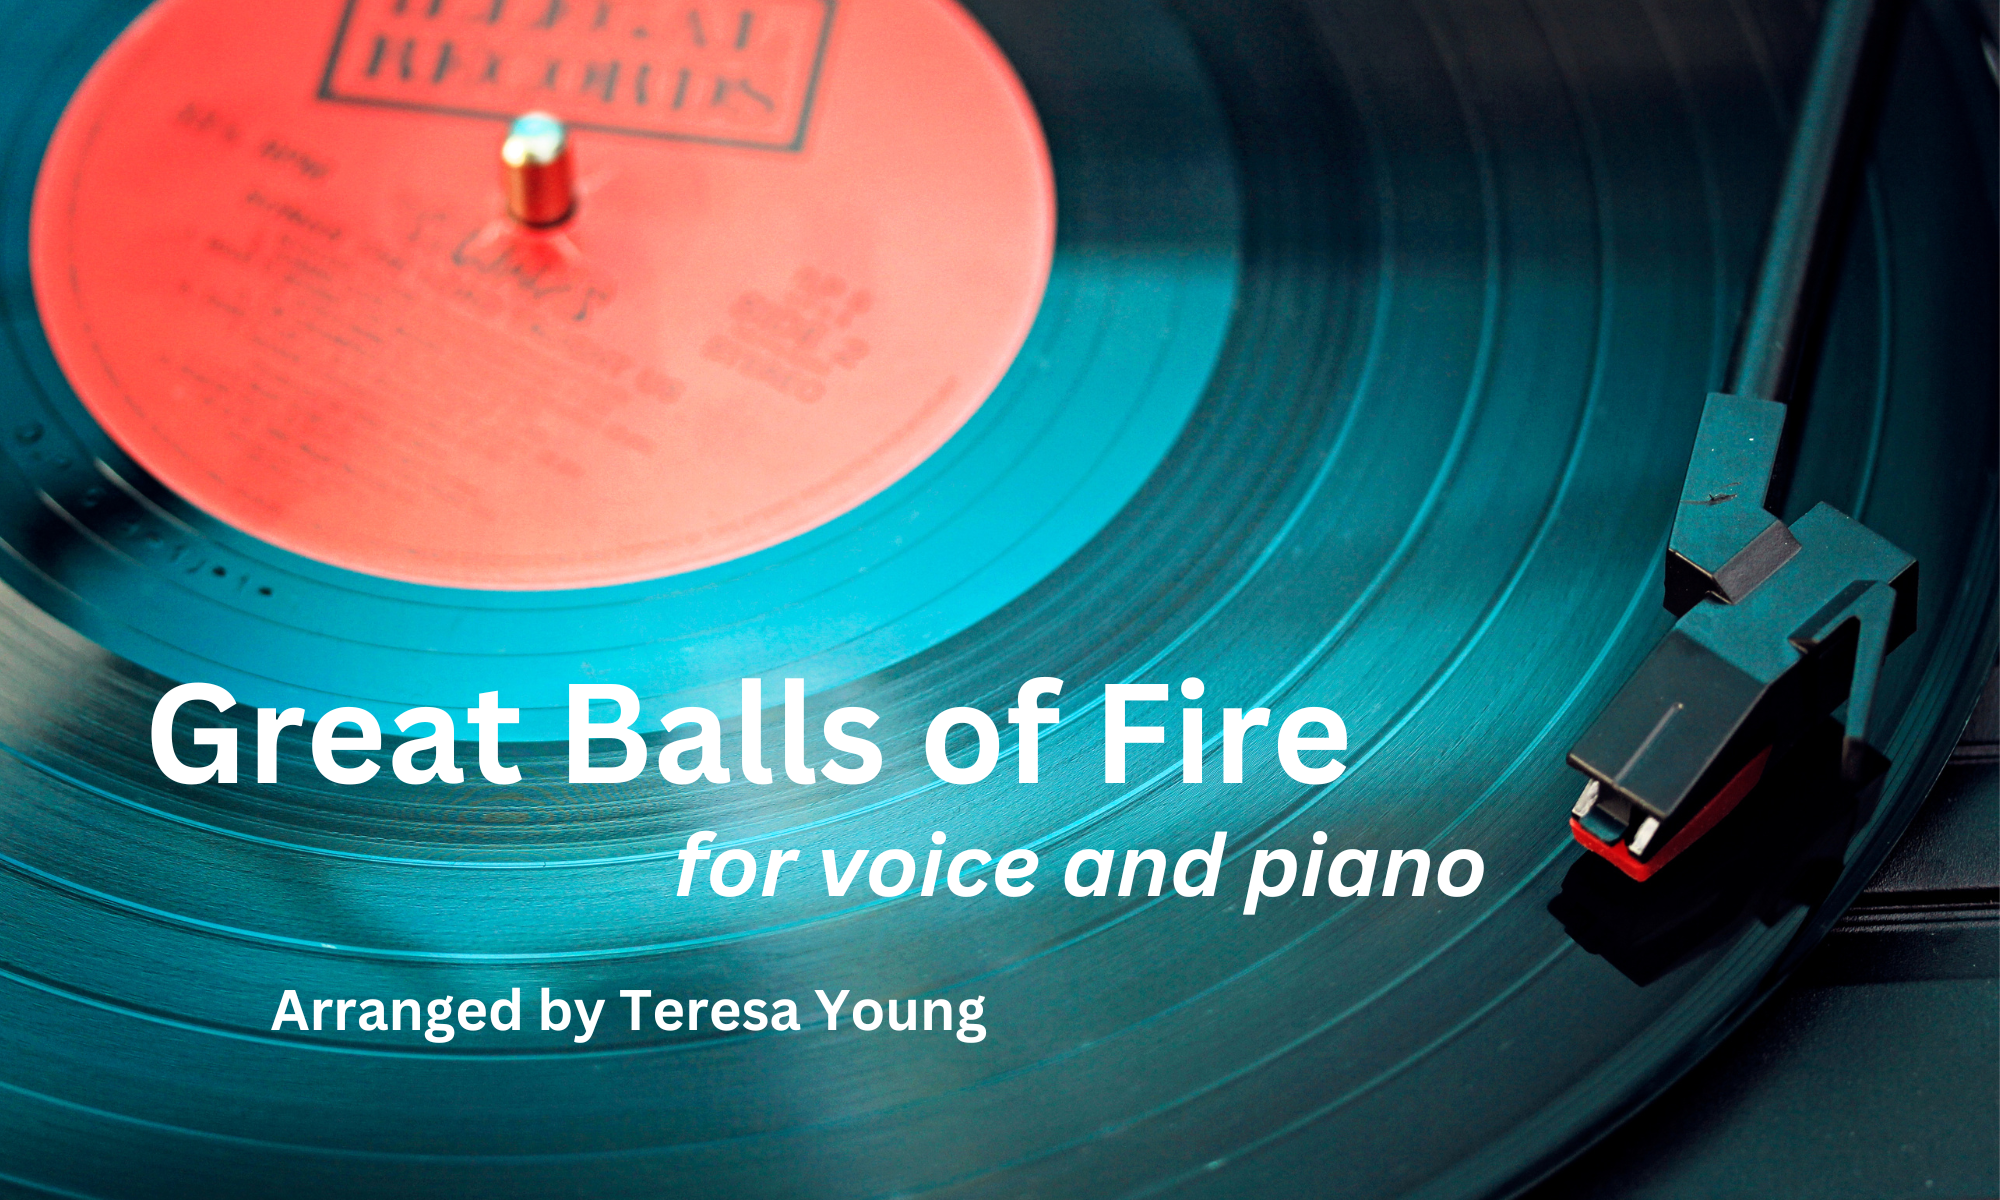 Great Balls of Fire, arranged by Teresa Young